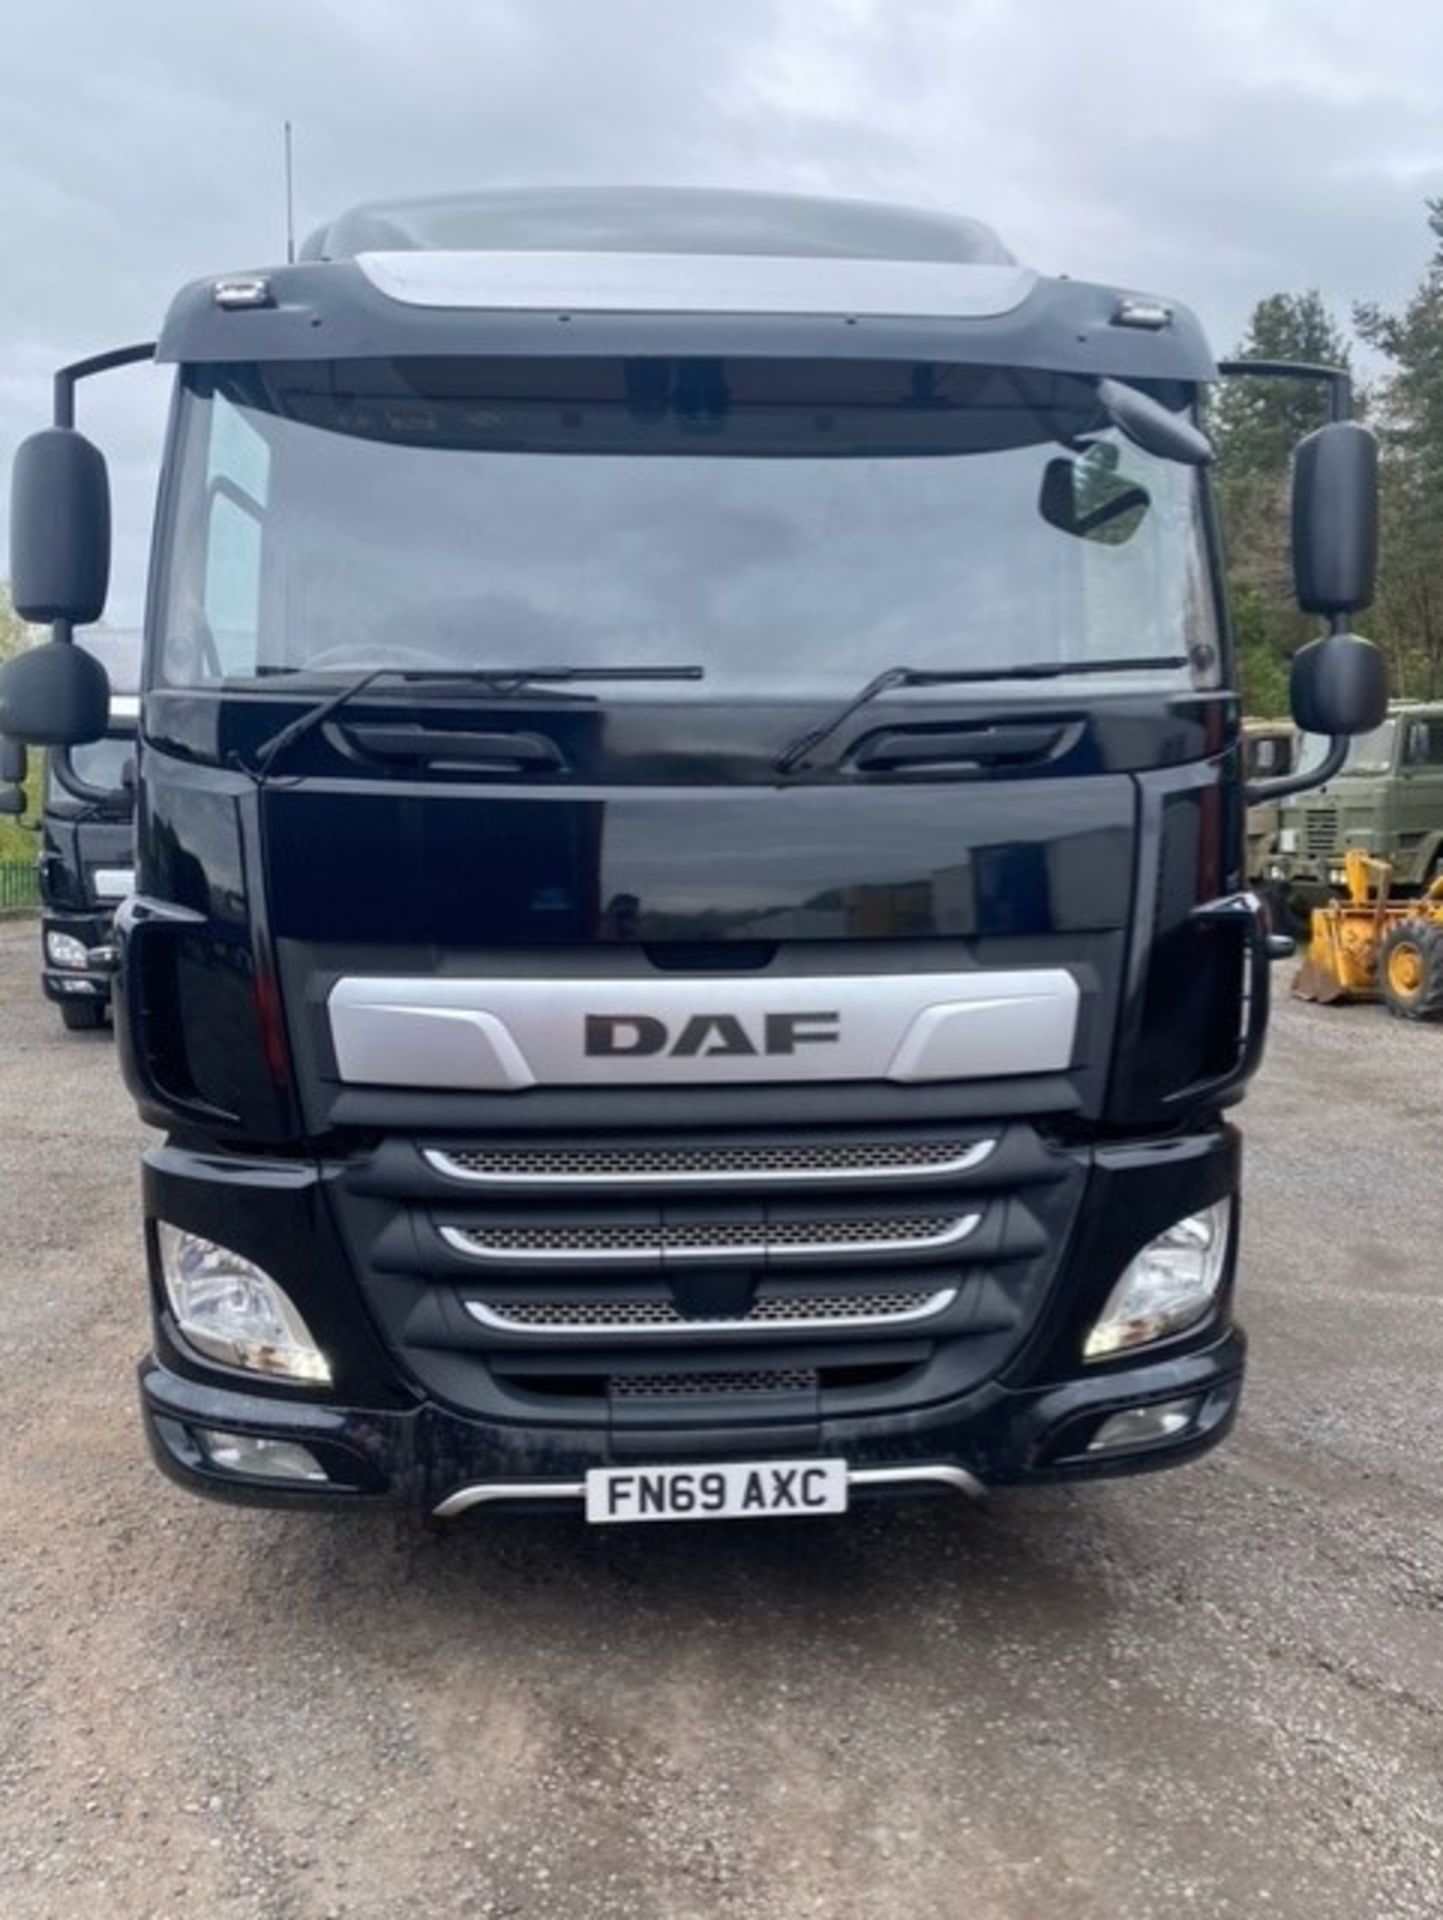 2019, DAF CF 260 FA - FN69 AXC (18 Ton Rigid Truck with Tail Lift) - Image 16 of 17